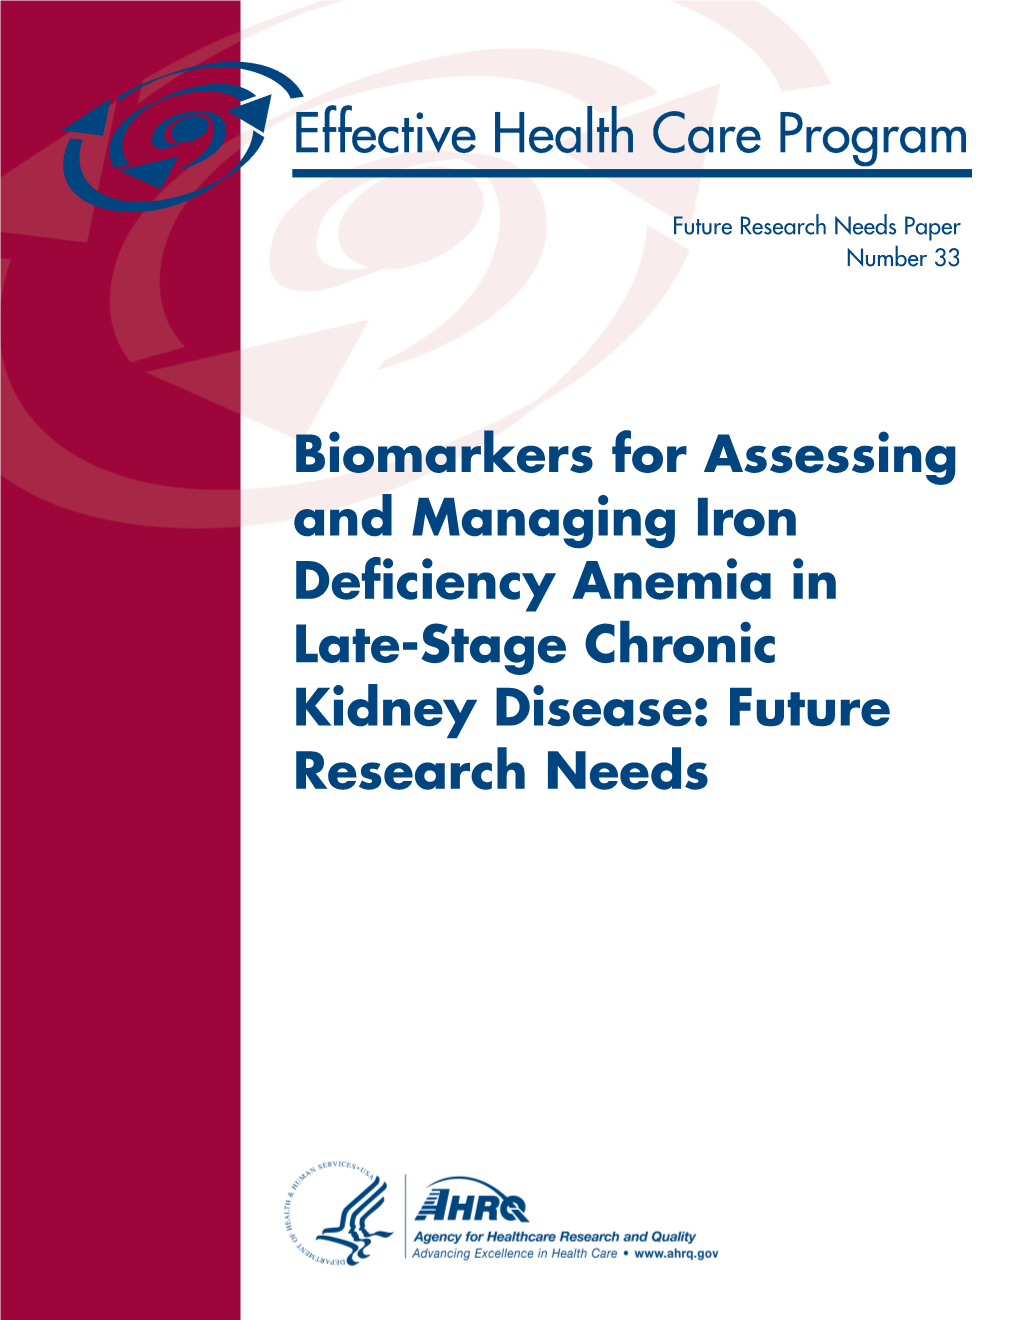 Biomarkers for Assessing and Managing Iron Deficiency Anemia in Late-Stage Chronic Kidney Disease: Future Research Needs Future Research Needs Paper Number 33